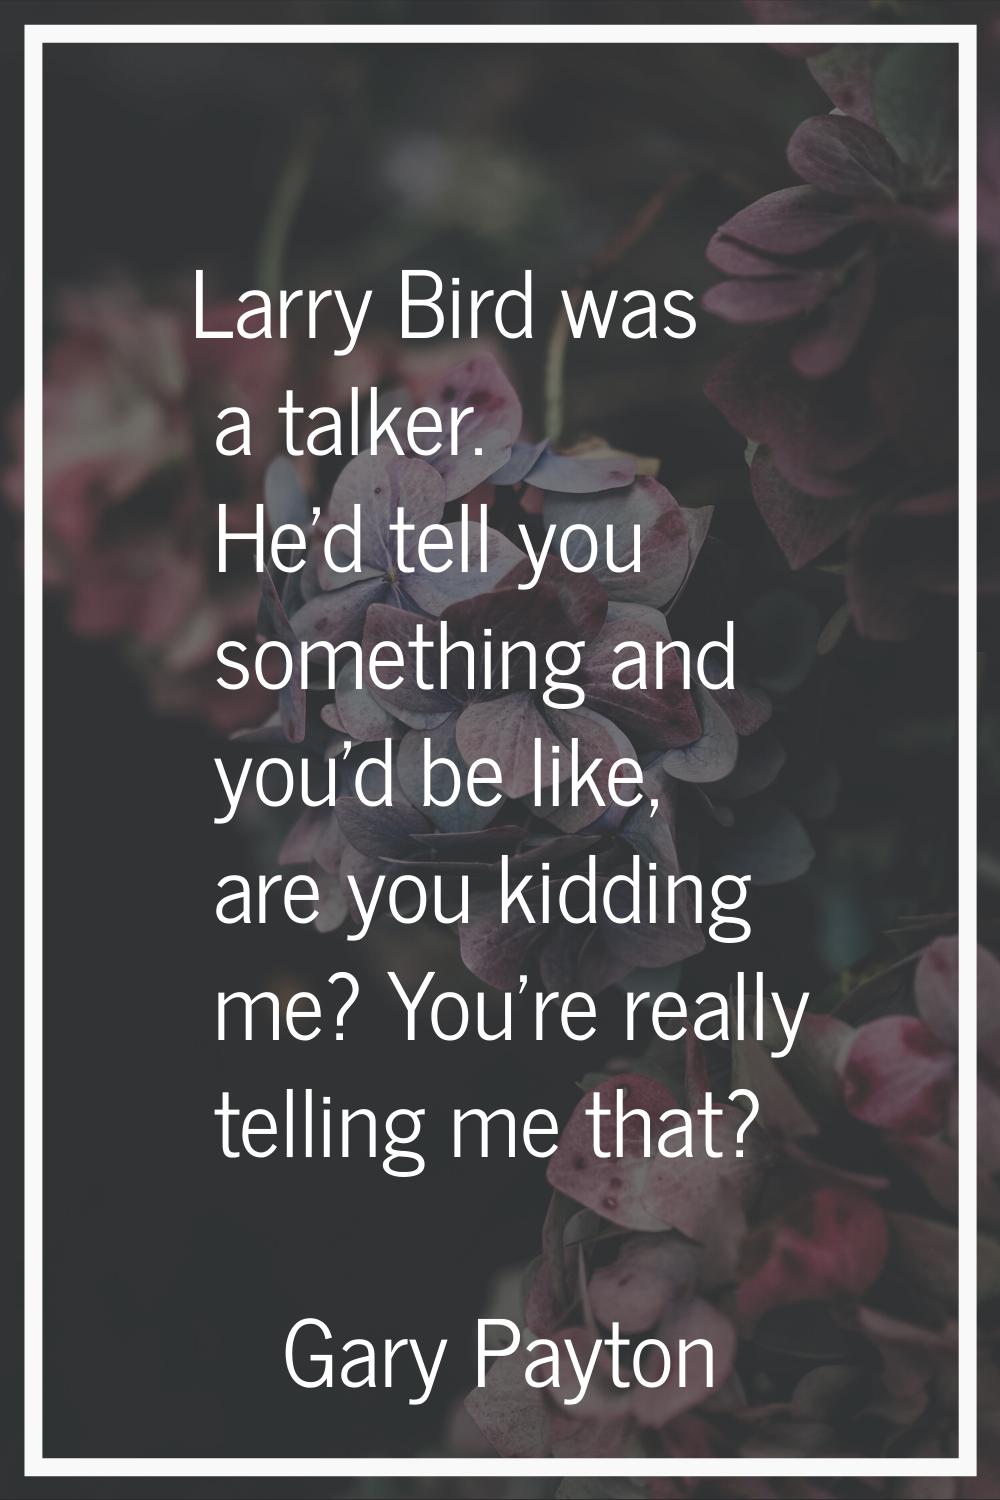 Larry Bird was a talker. He'd tell you something and you'd be like, are you kidding me? You're real